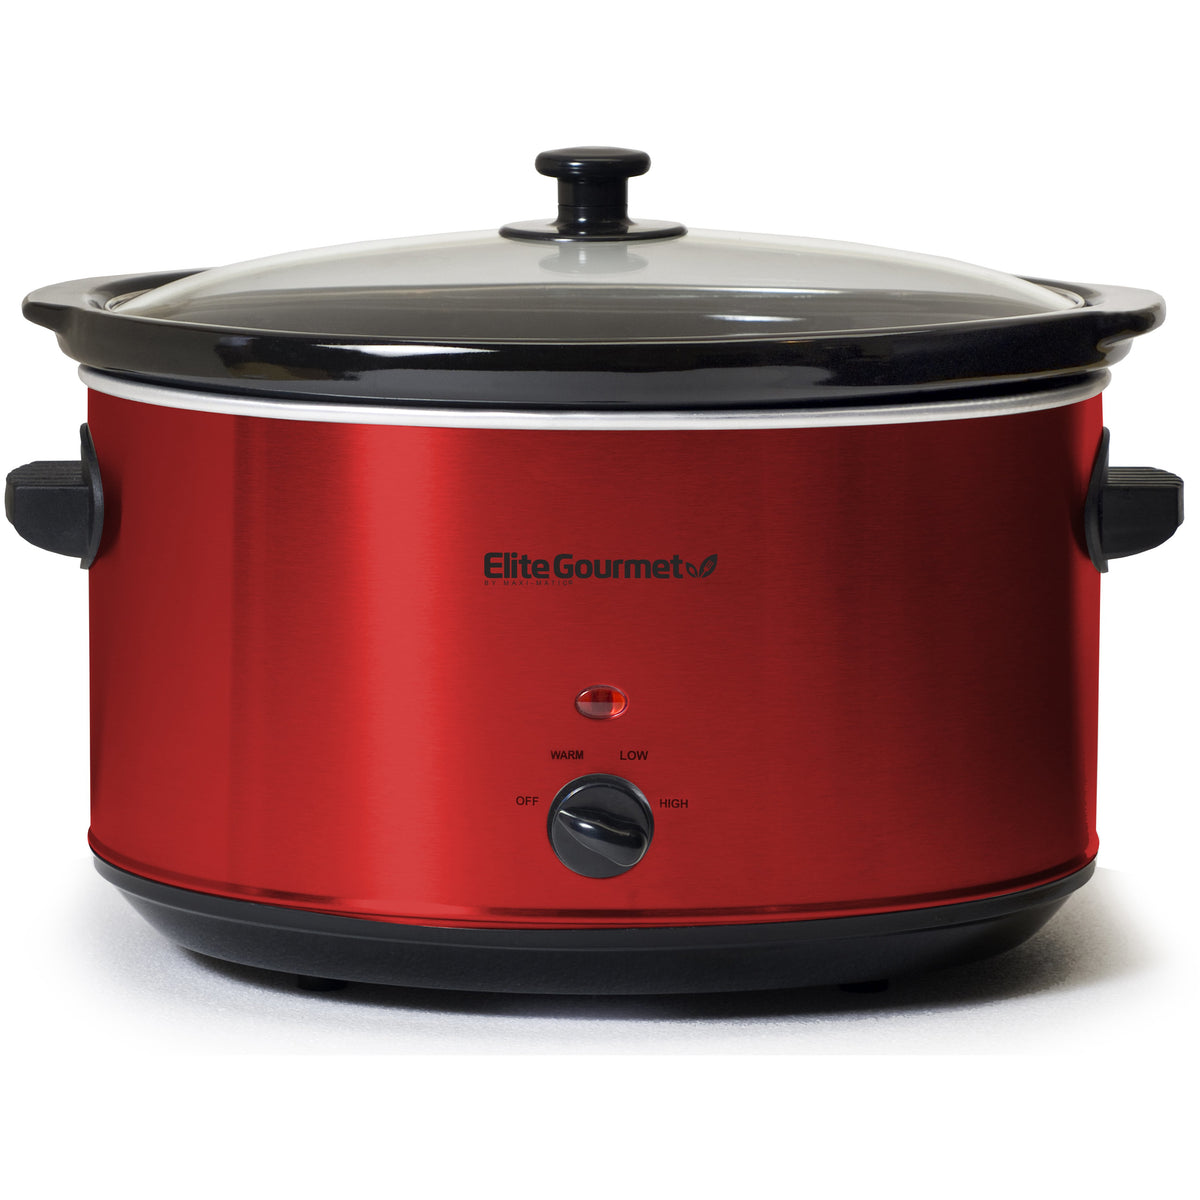 Smart Planet CS1SC Campbell's Slow Cooker with Tempered, Red 